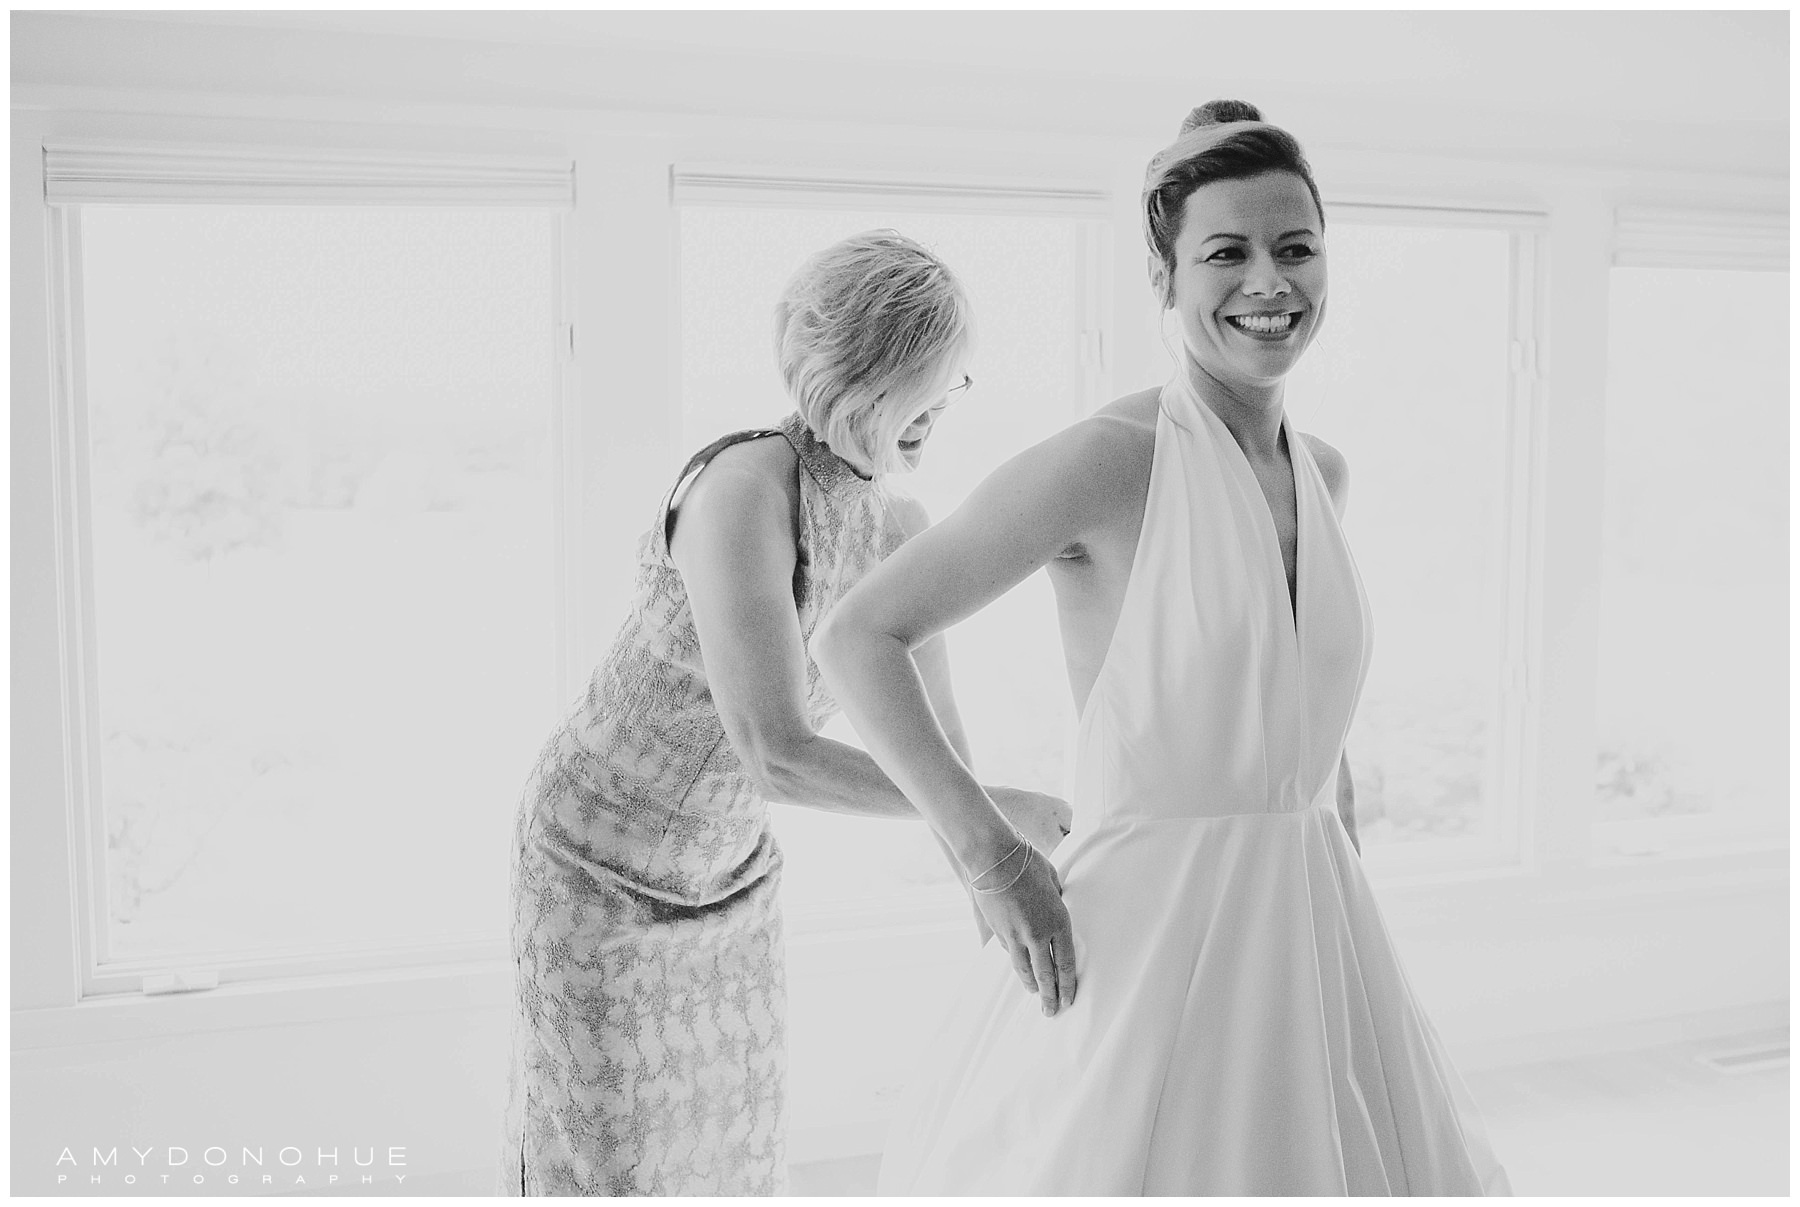 Getting into the dress | Basin Harbor Wedding Photographer | © Amy Donohue Photography